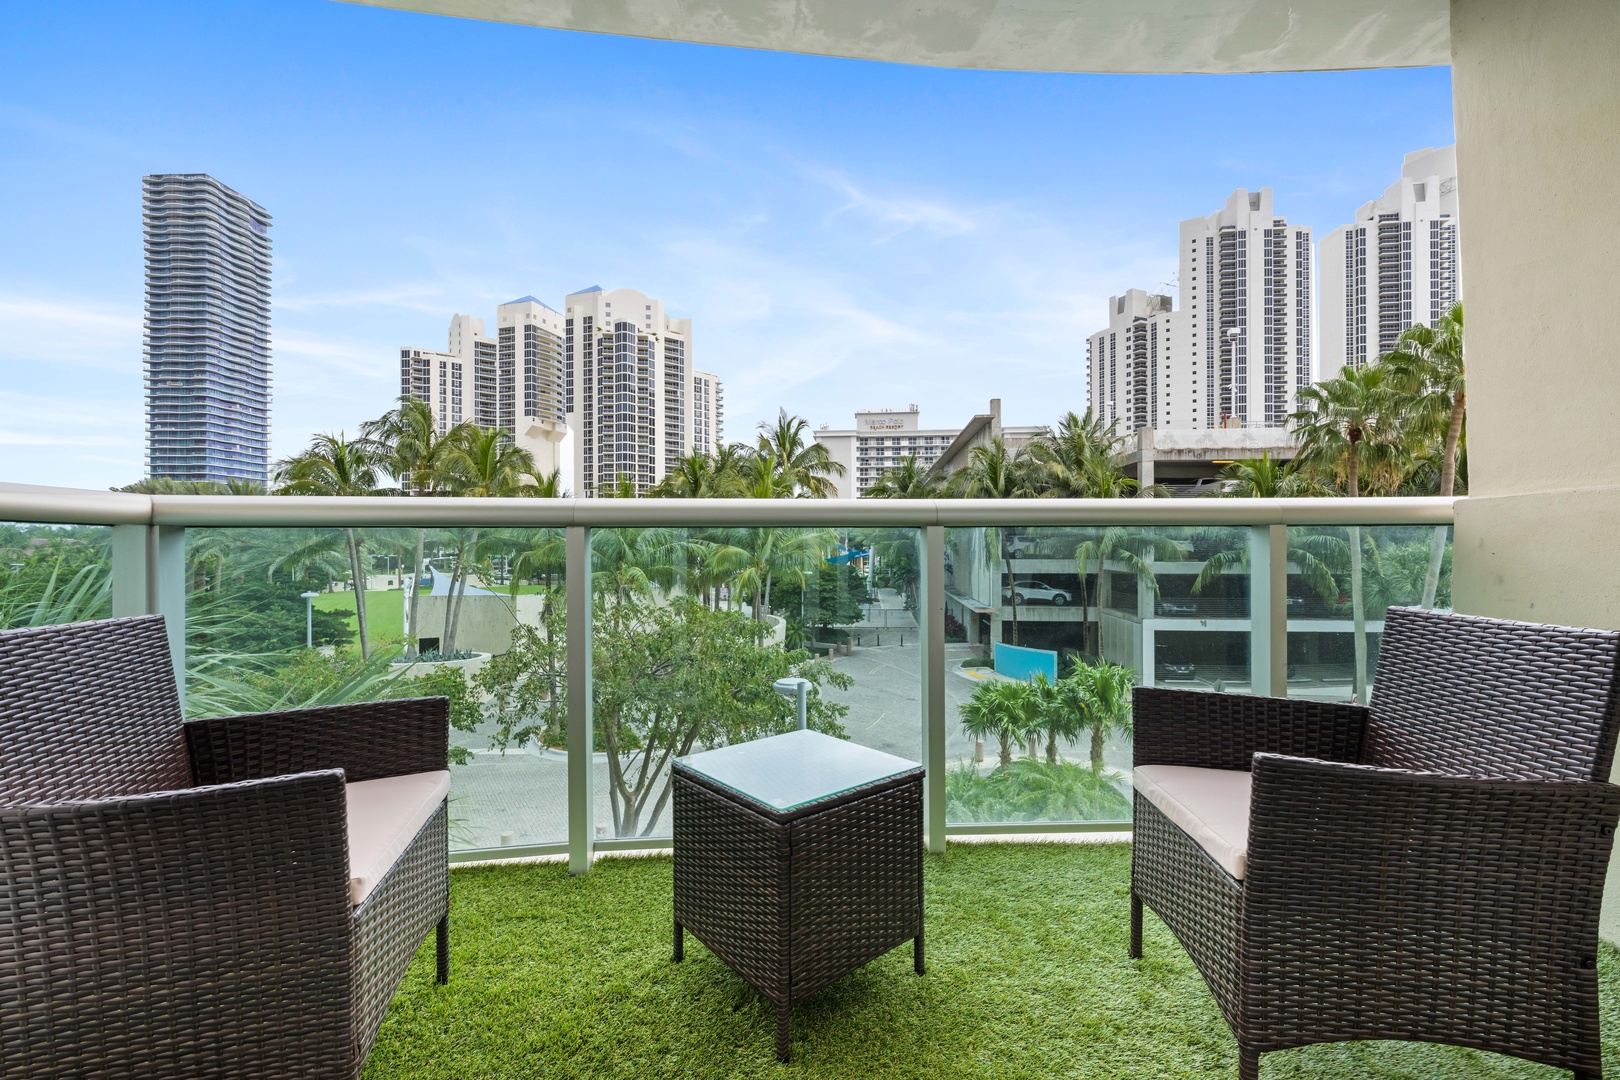 Step out onto the balcony & relax with gorgeous views